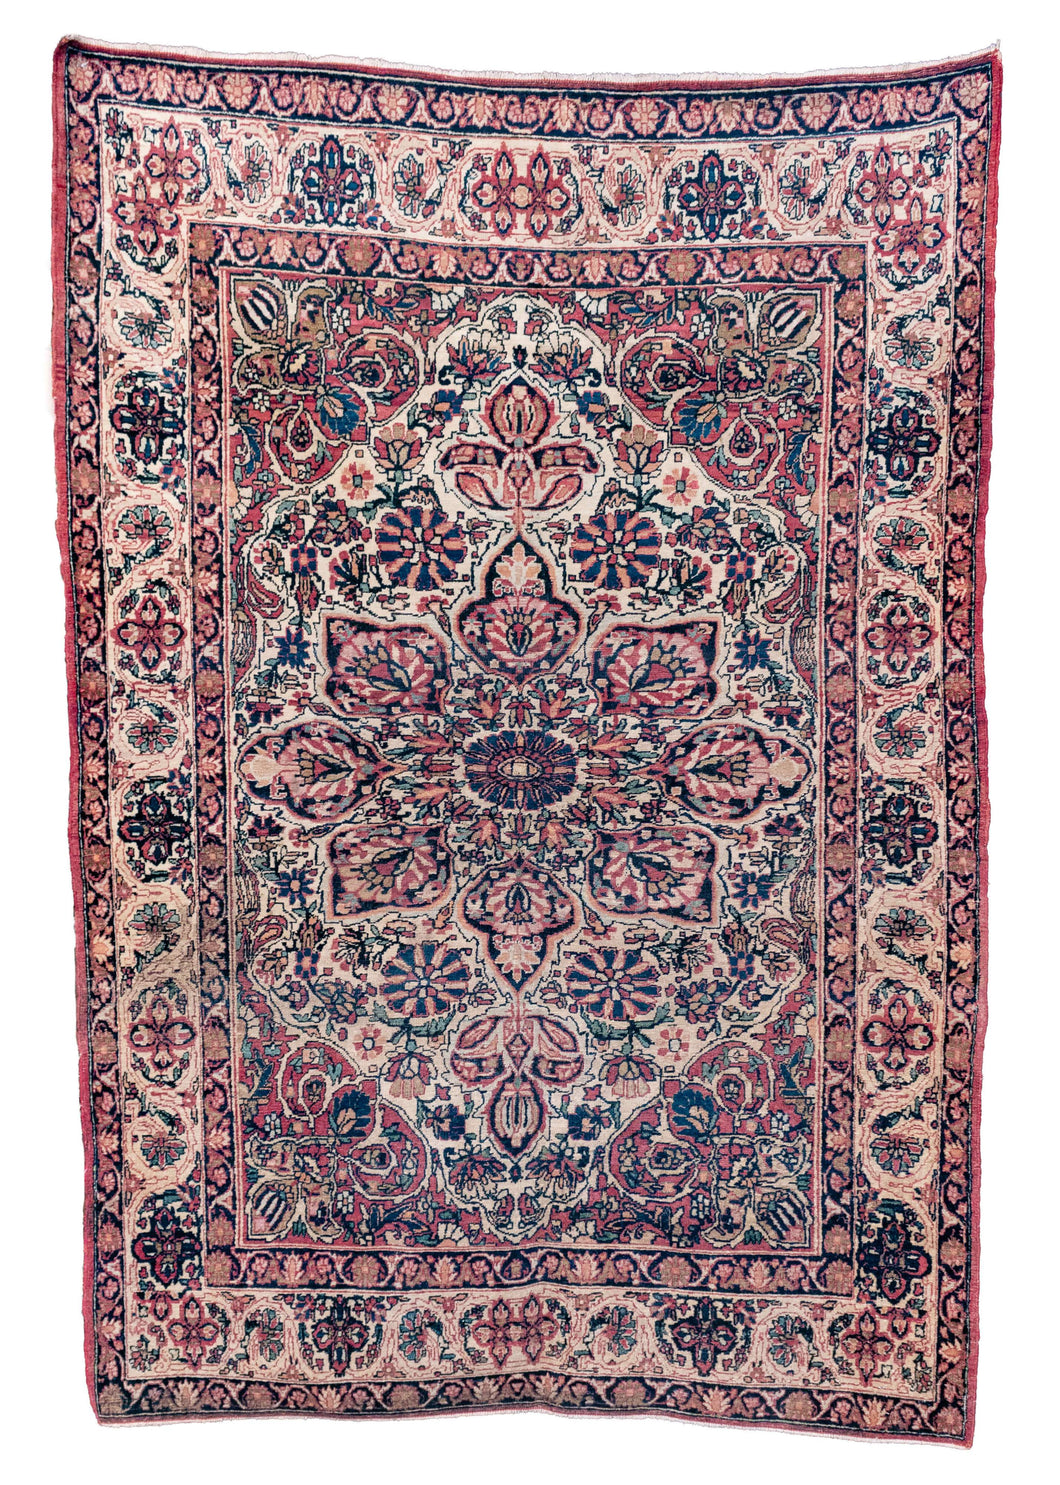 Antique Central Persian Lavar Kerman Area rug featuring a central medallion and many flowers